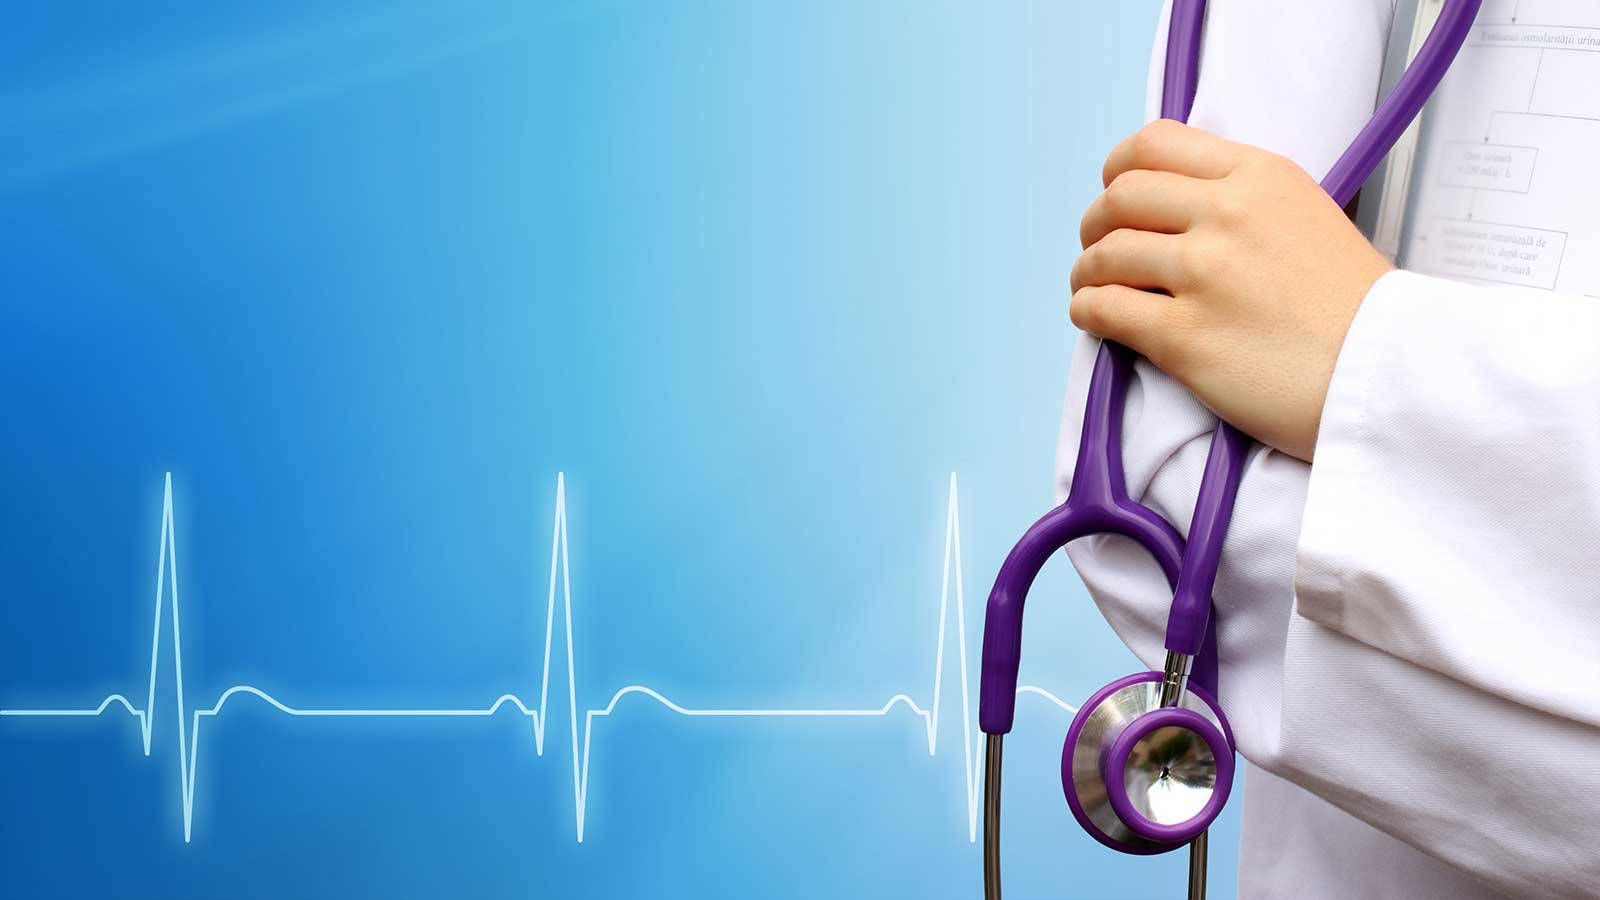 Focused Healthcare Professional with a Stethoscope Wallpaper